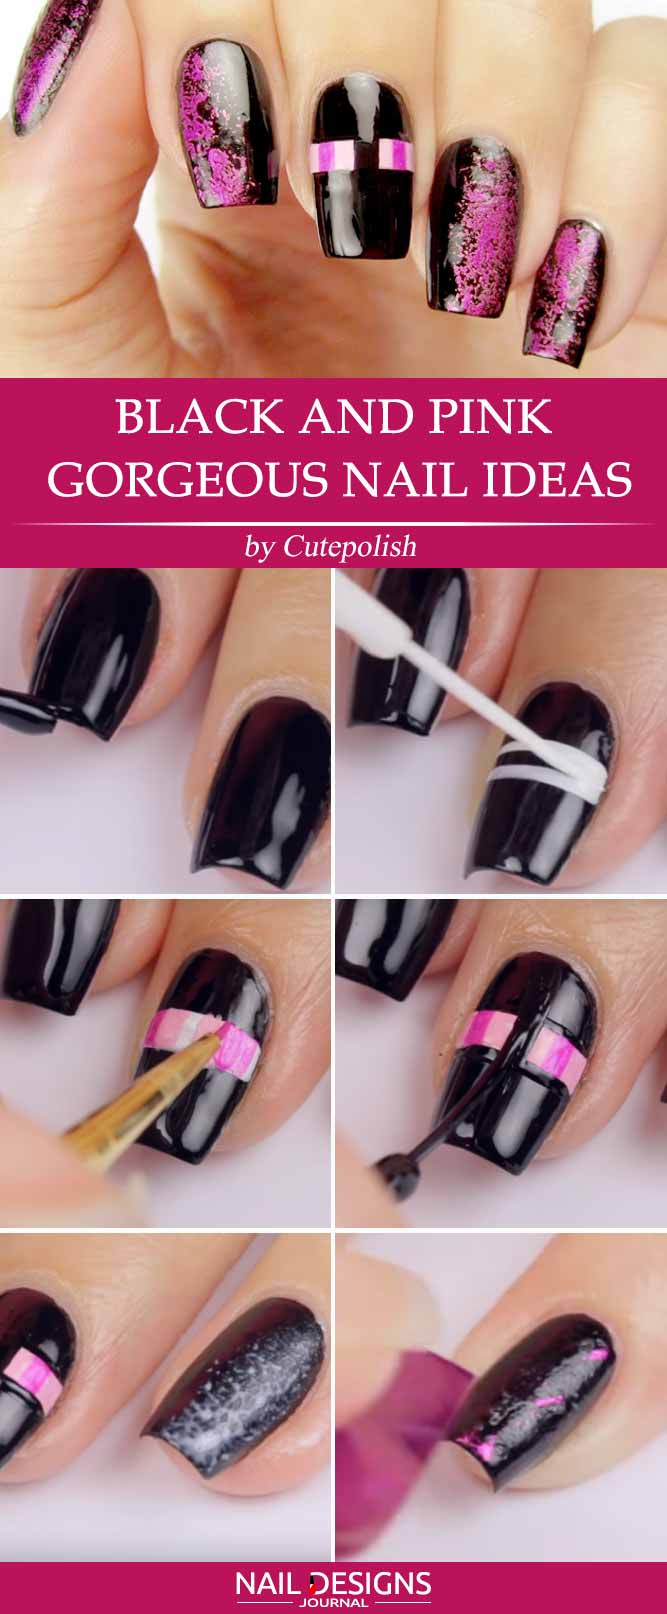 Black and Pink Gorgeous Nail Ideas